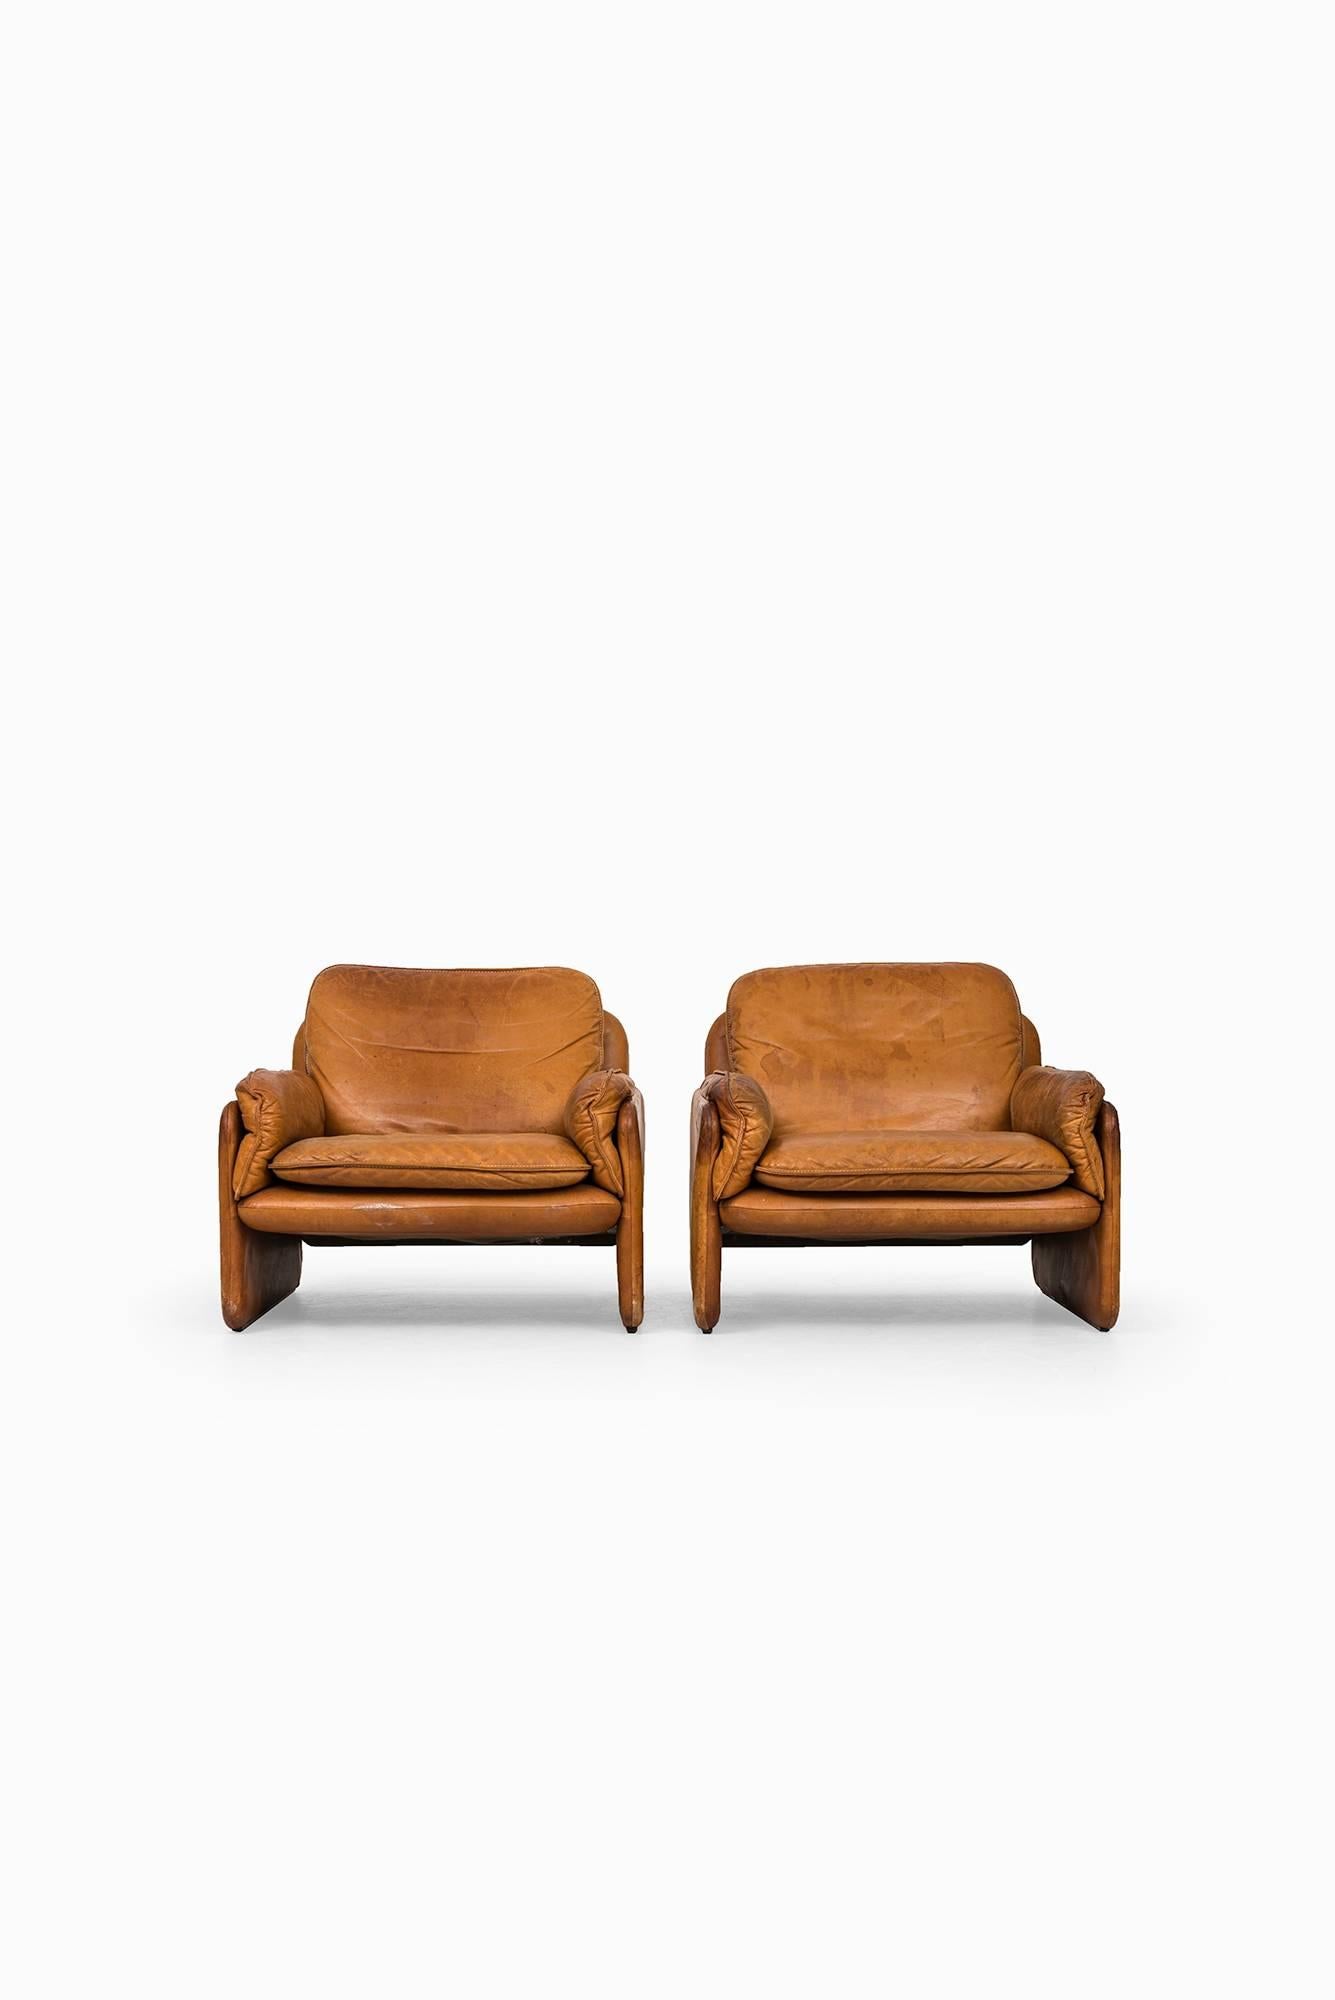 Rare pair of easy chairs designed by design team at De Sede. Produced by De Sede in Switzerland.